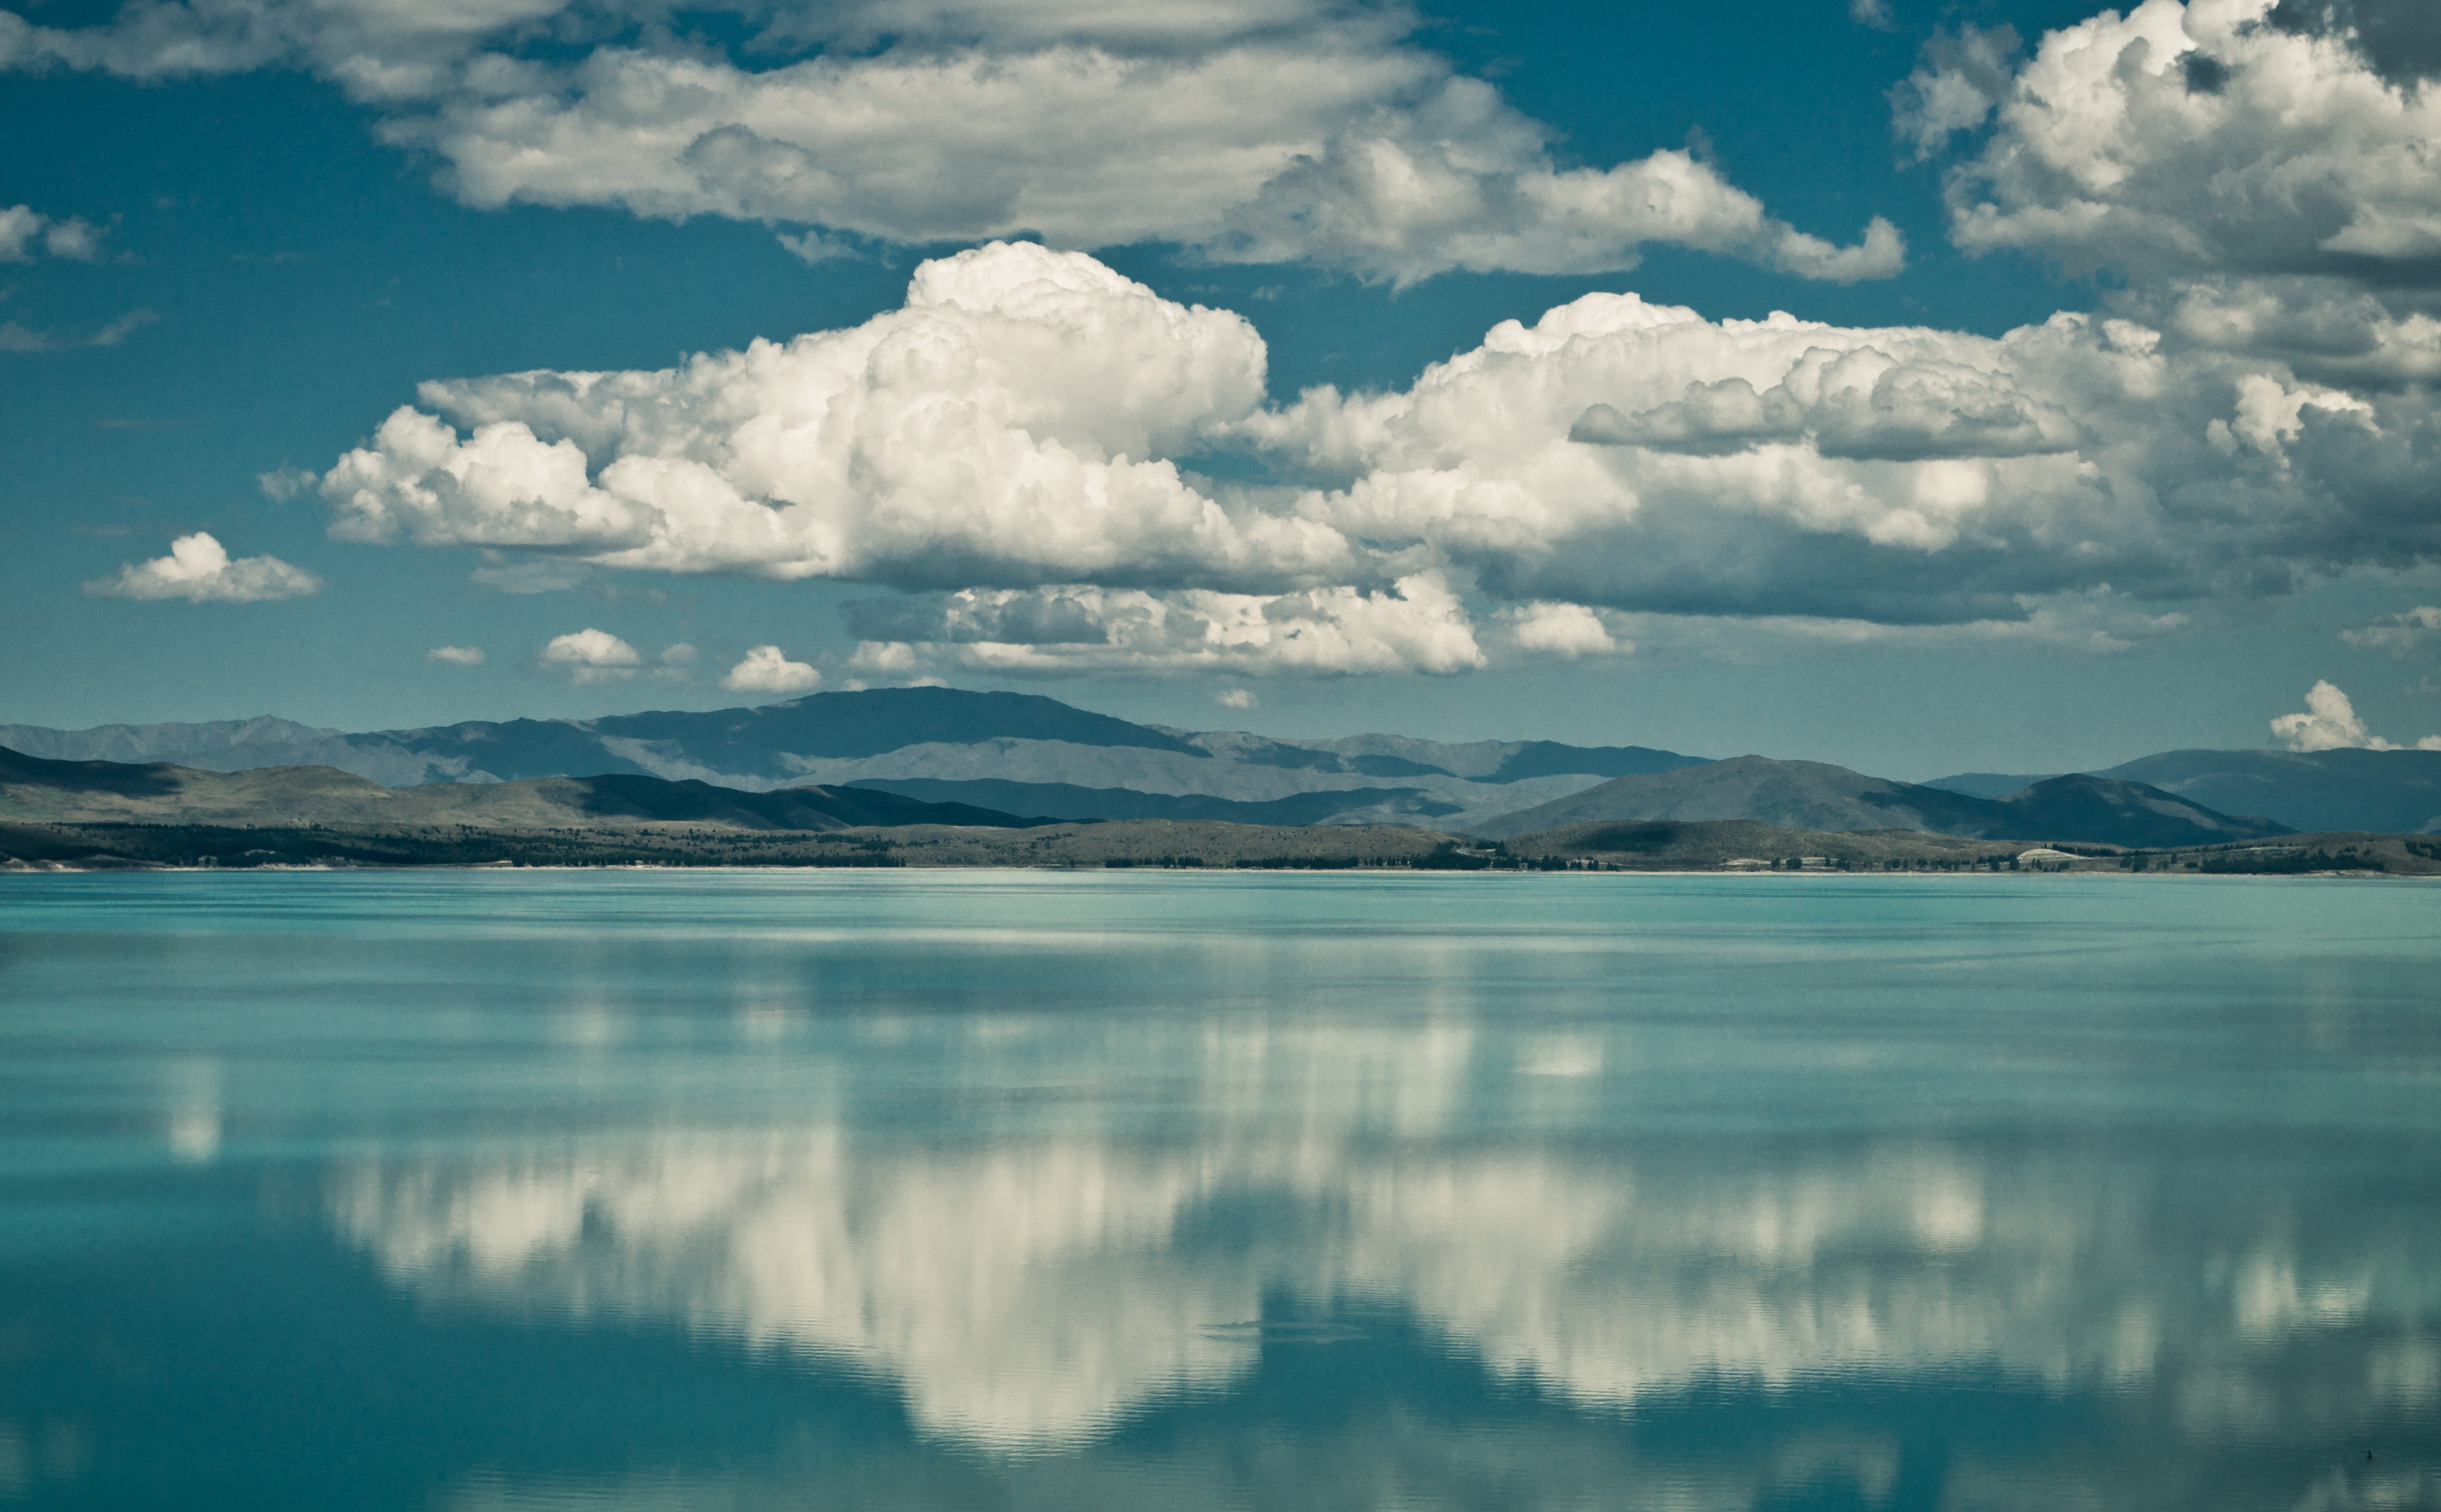 Reflections in calm lake / 4182 x 2591 / Landscape / Photography ...